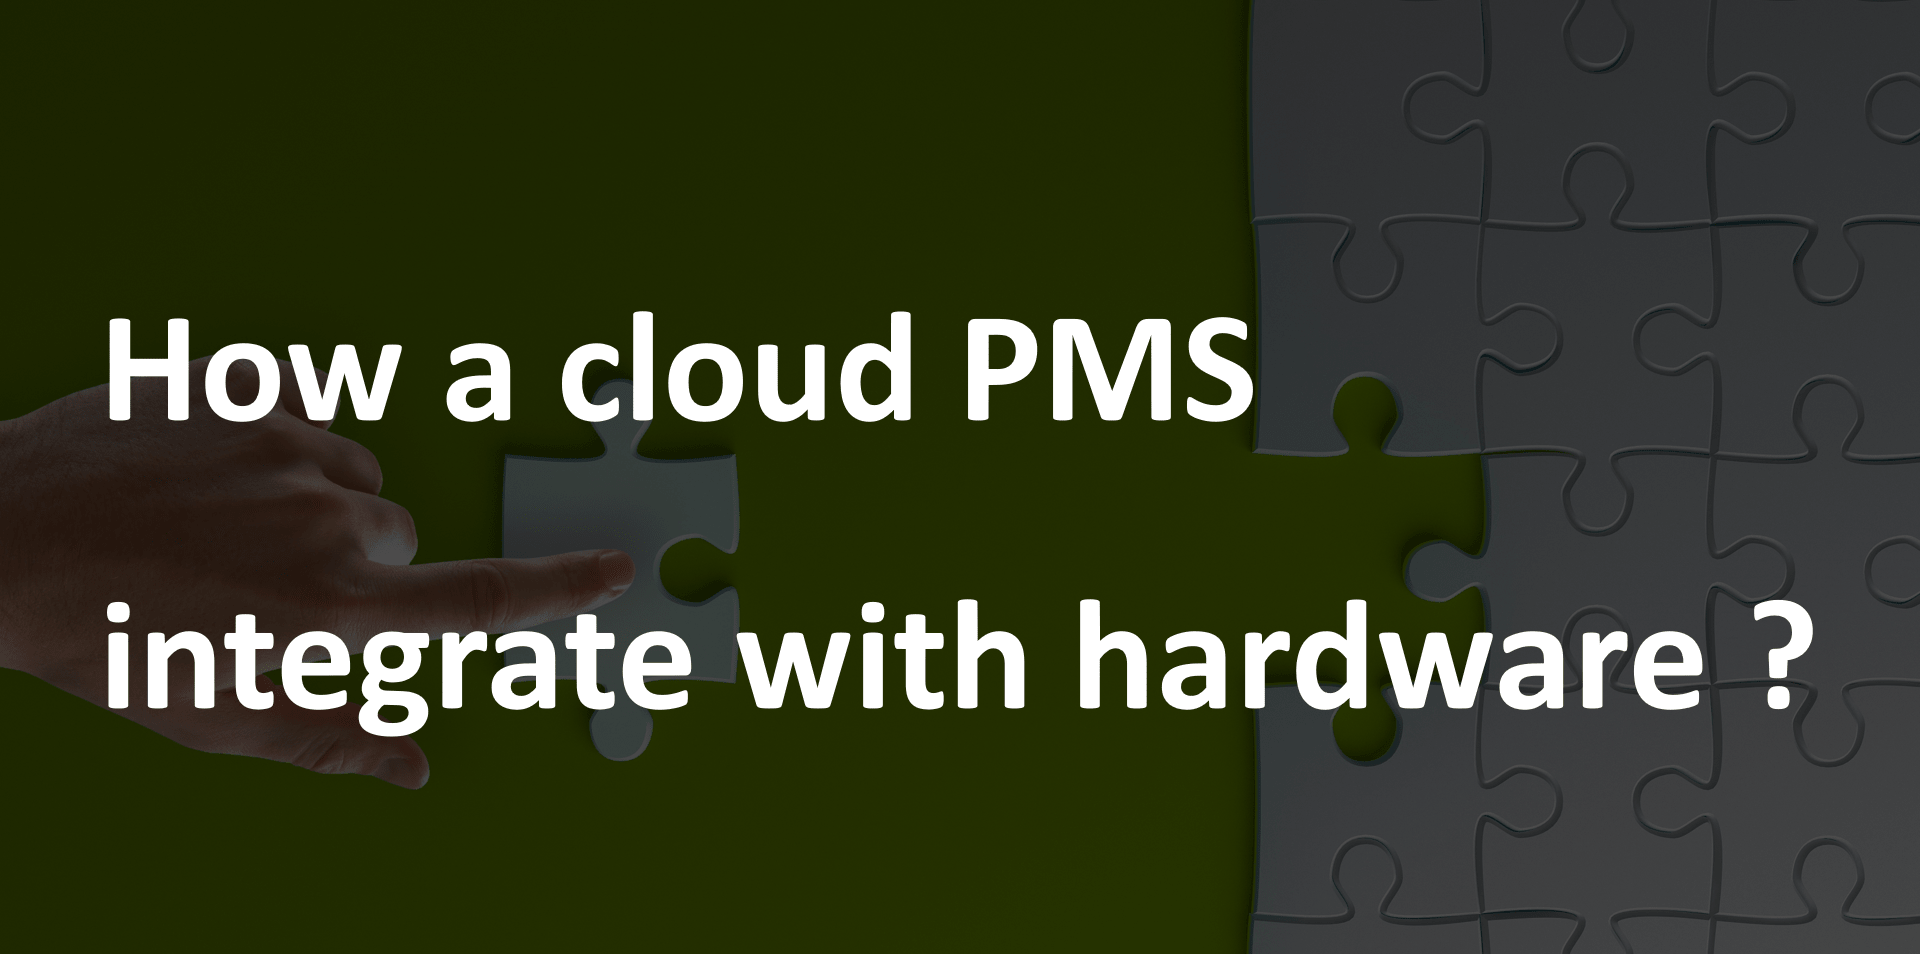 How a cloud PMS integrate with hardware?